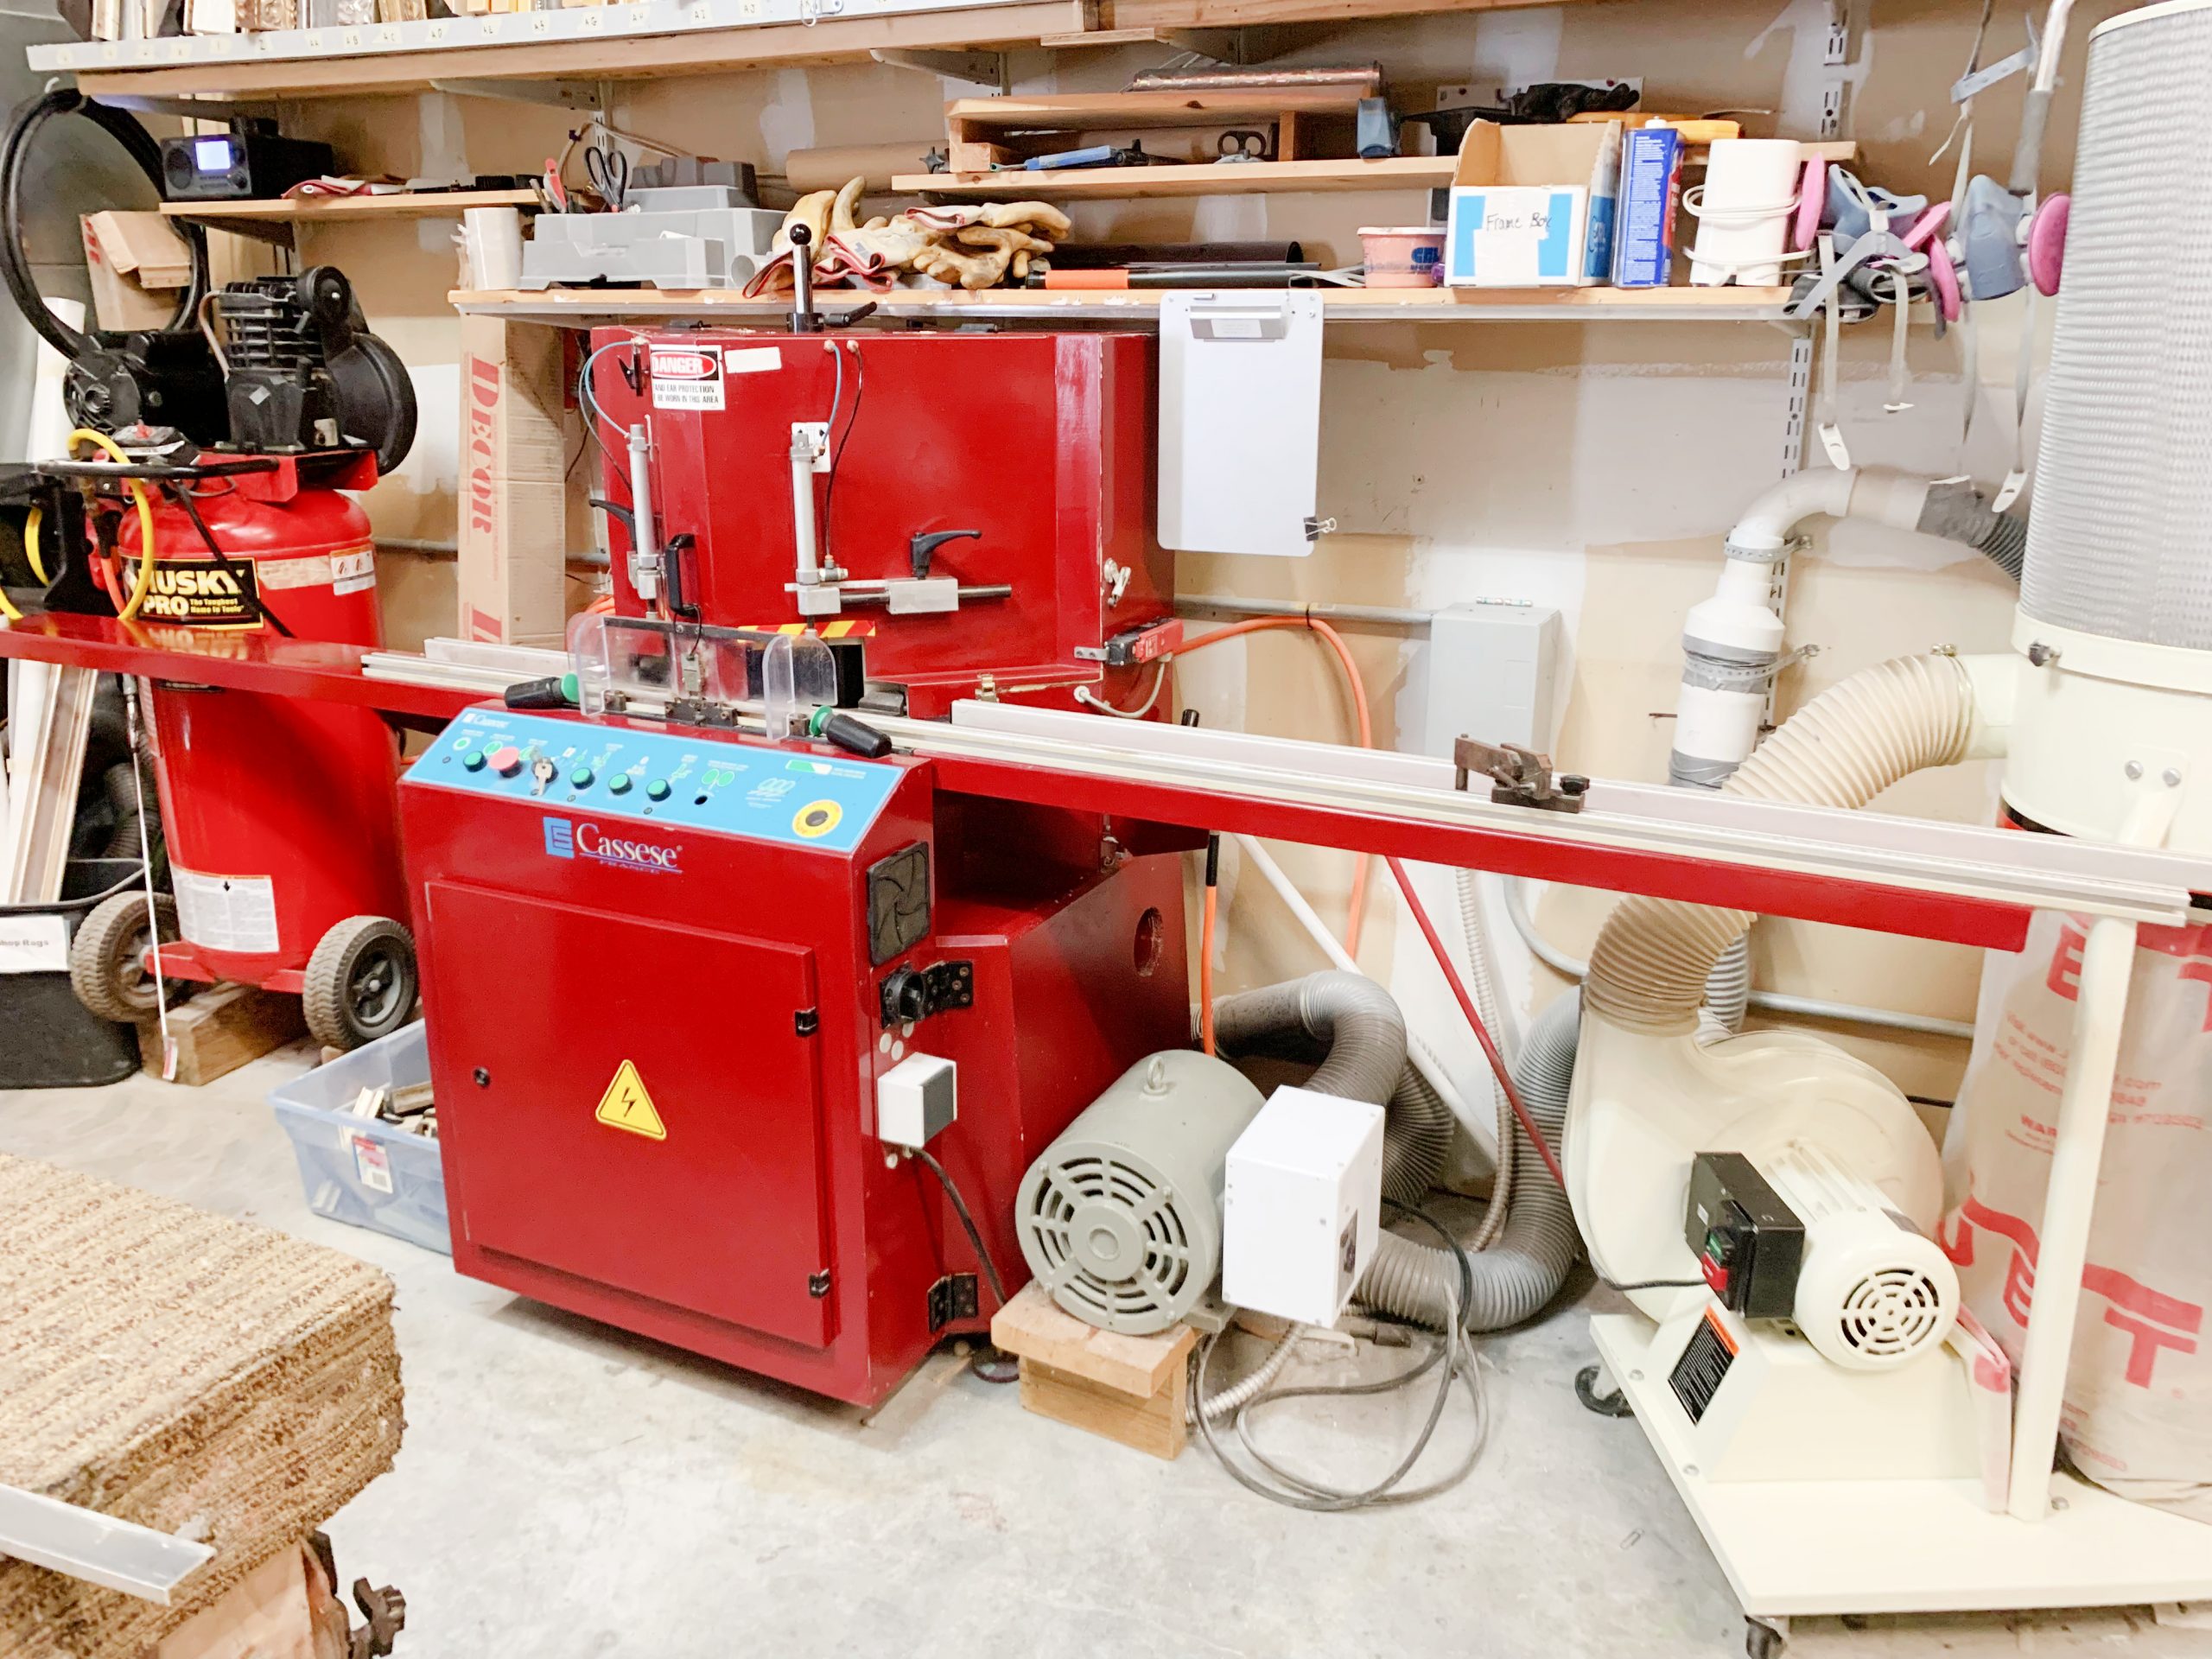 Picture Framing Equipment Lot: Cassese CS999 Double Miter Saw, ITW AMP VN2+1 Vnailer & Vertical Moulding Racks (Used) Item # UE-041922A (Louisiana)